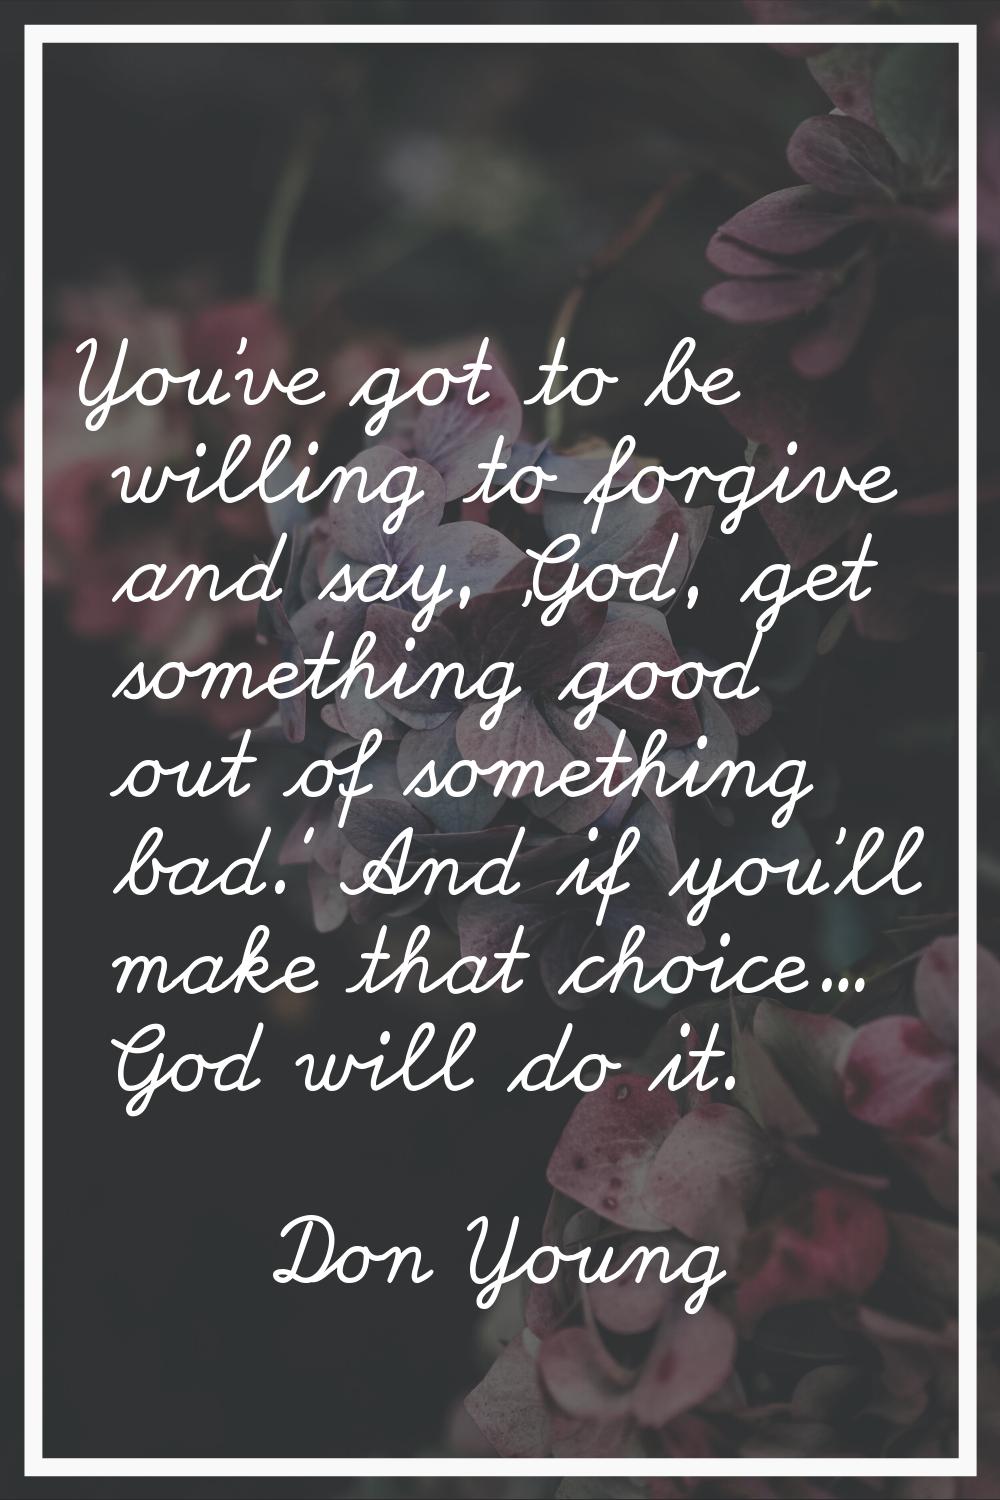 You've got to be willing to forgive and say, 'God, get something good out of something bad.' And if